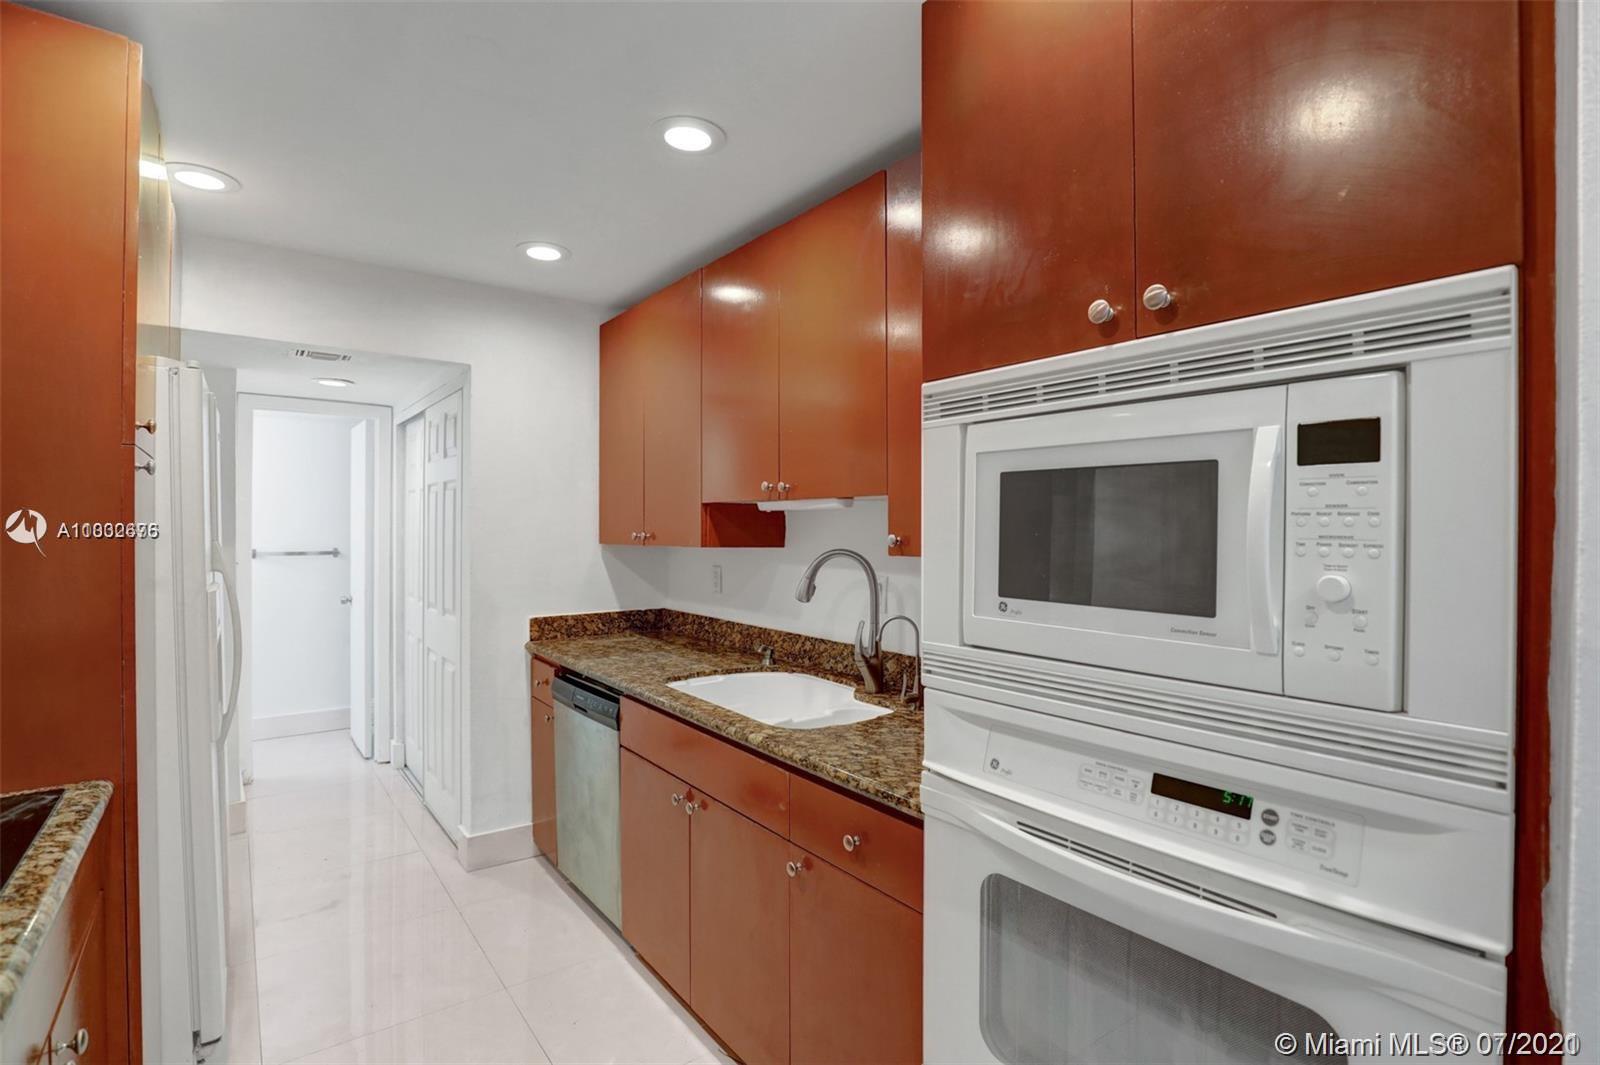 a hallway with granite countertop stainless steel appliances white cabinets and a wooden floor